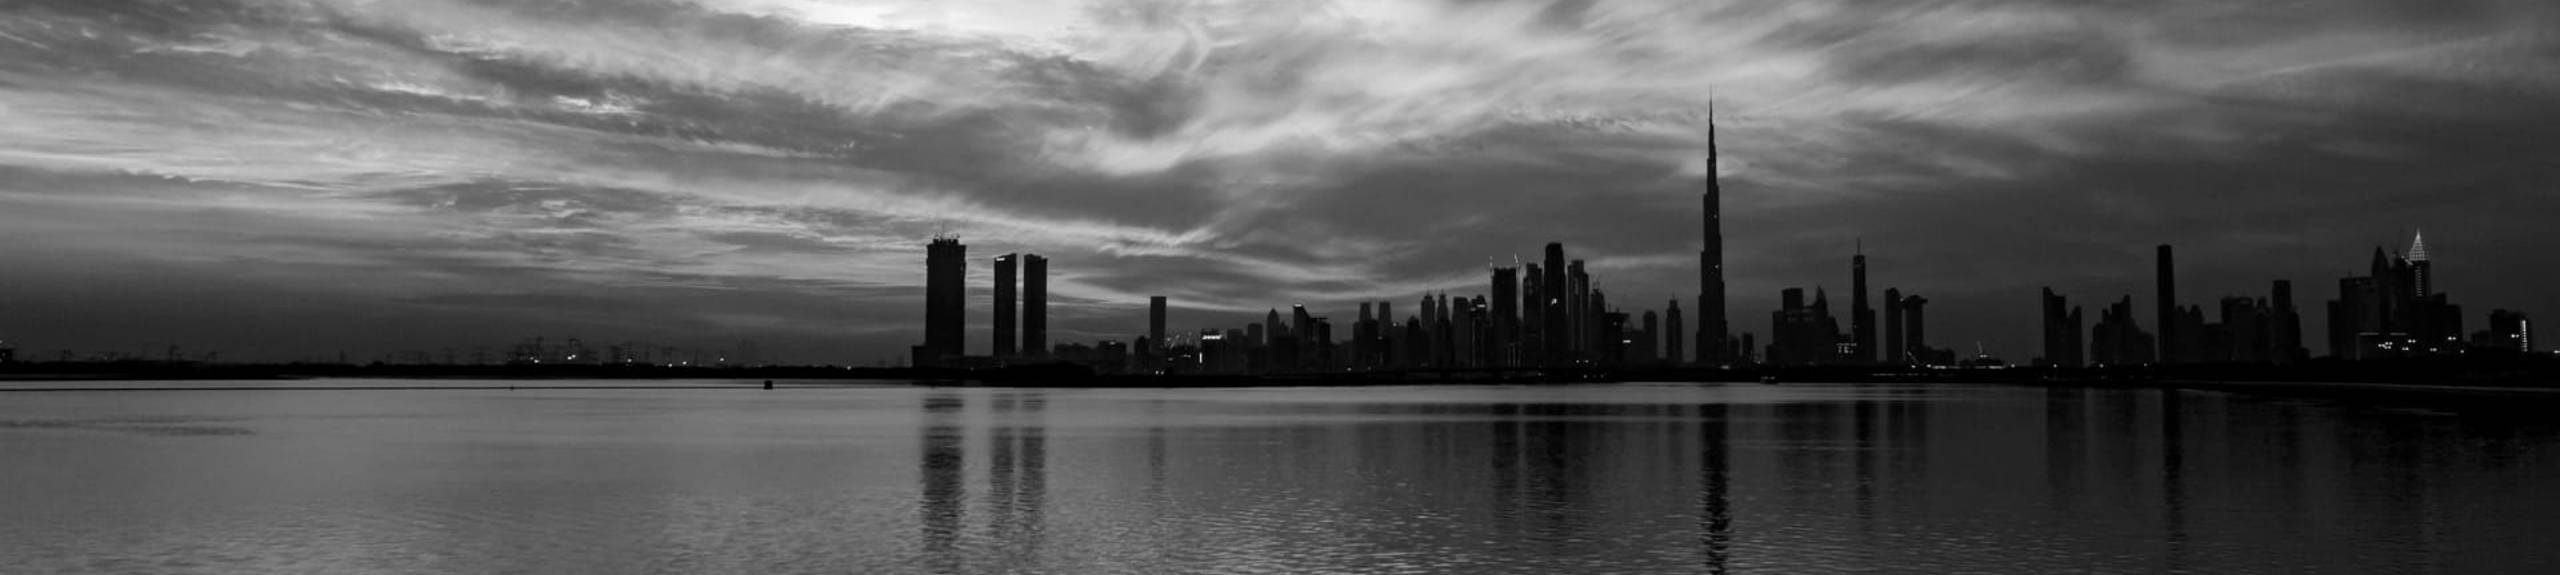 Black and White City View